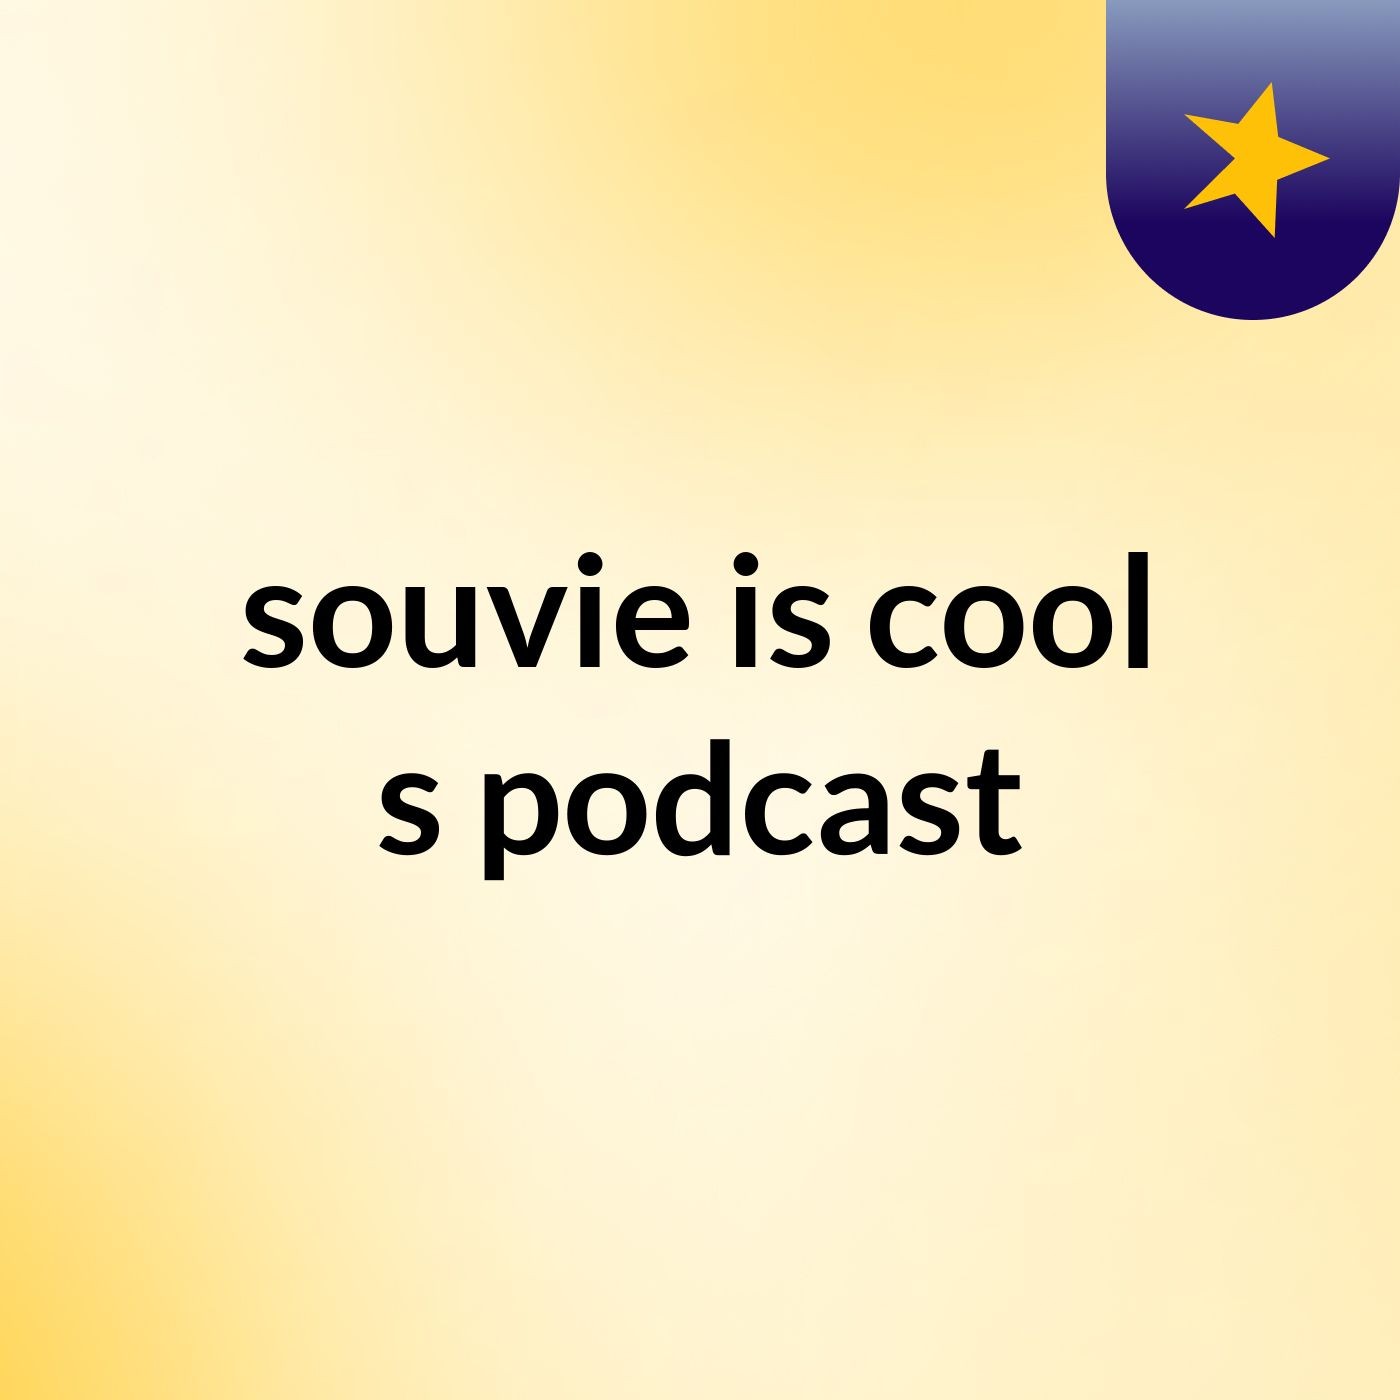 souvie is cool's podcast